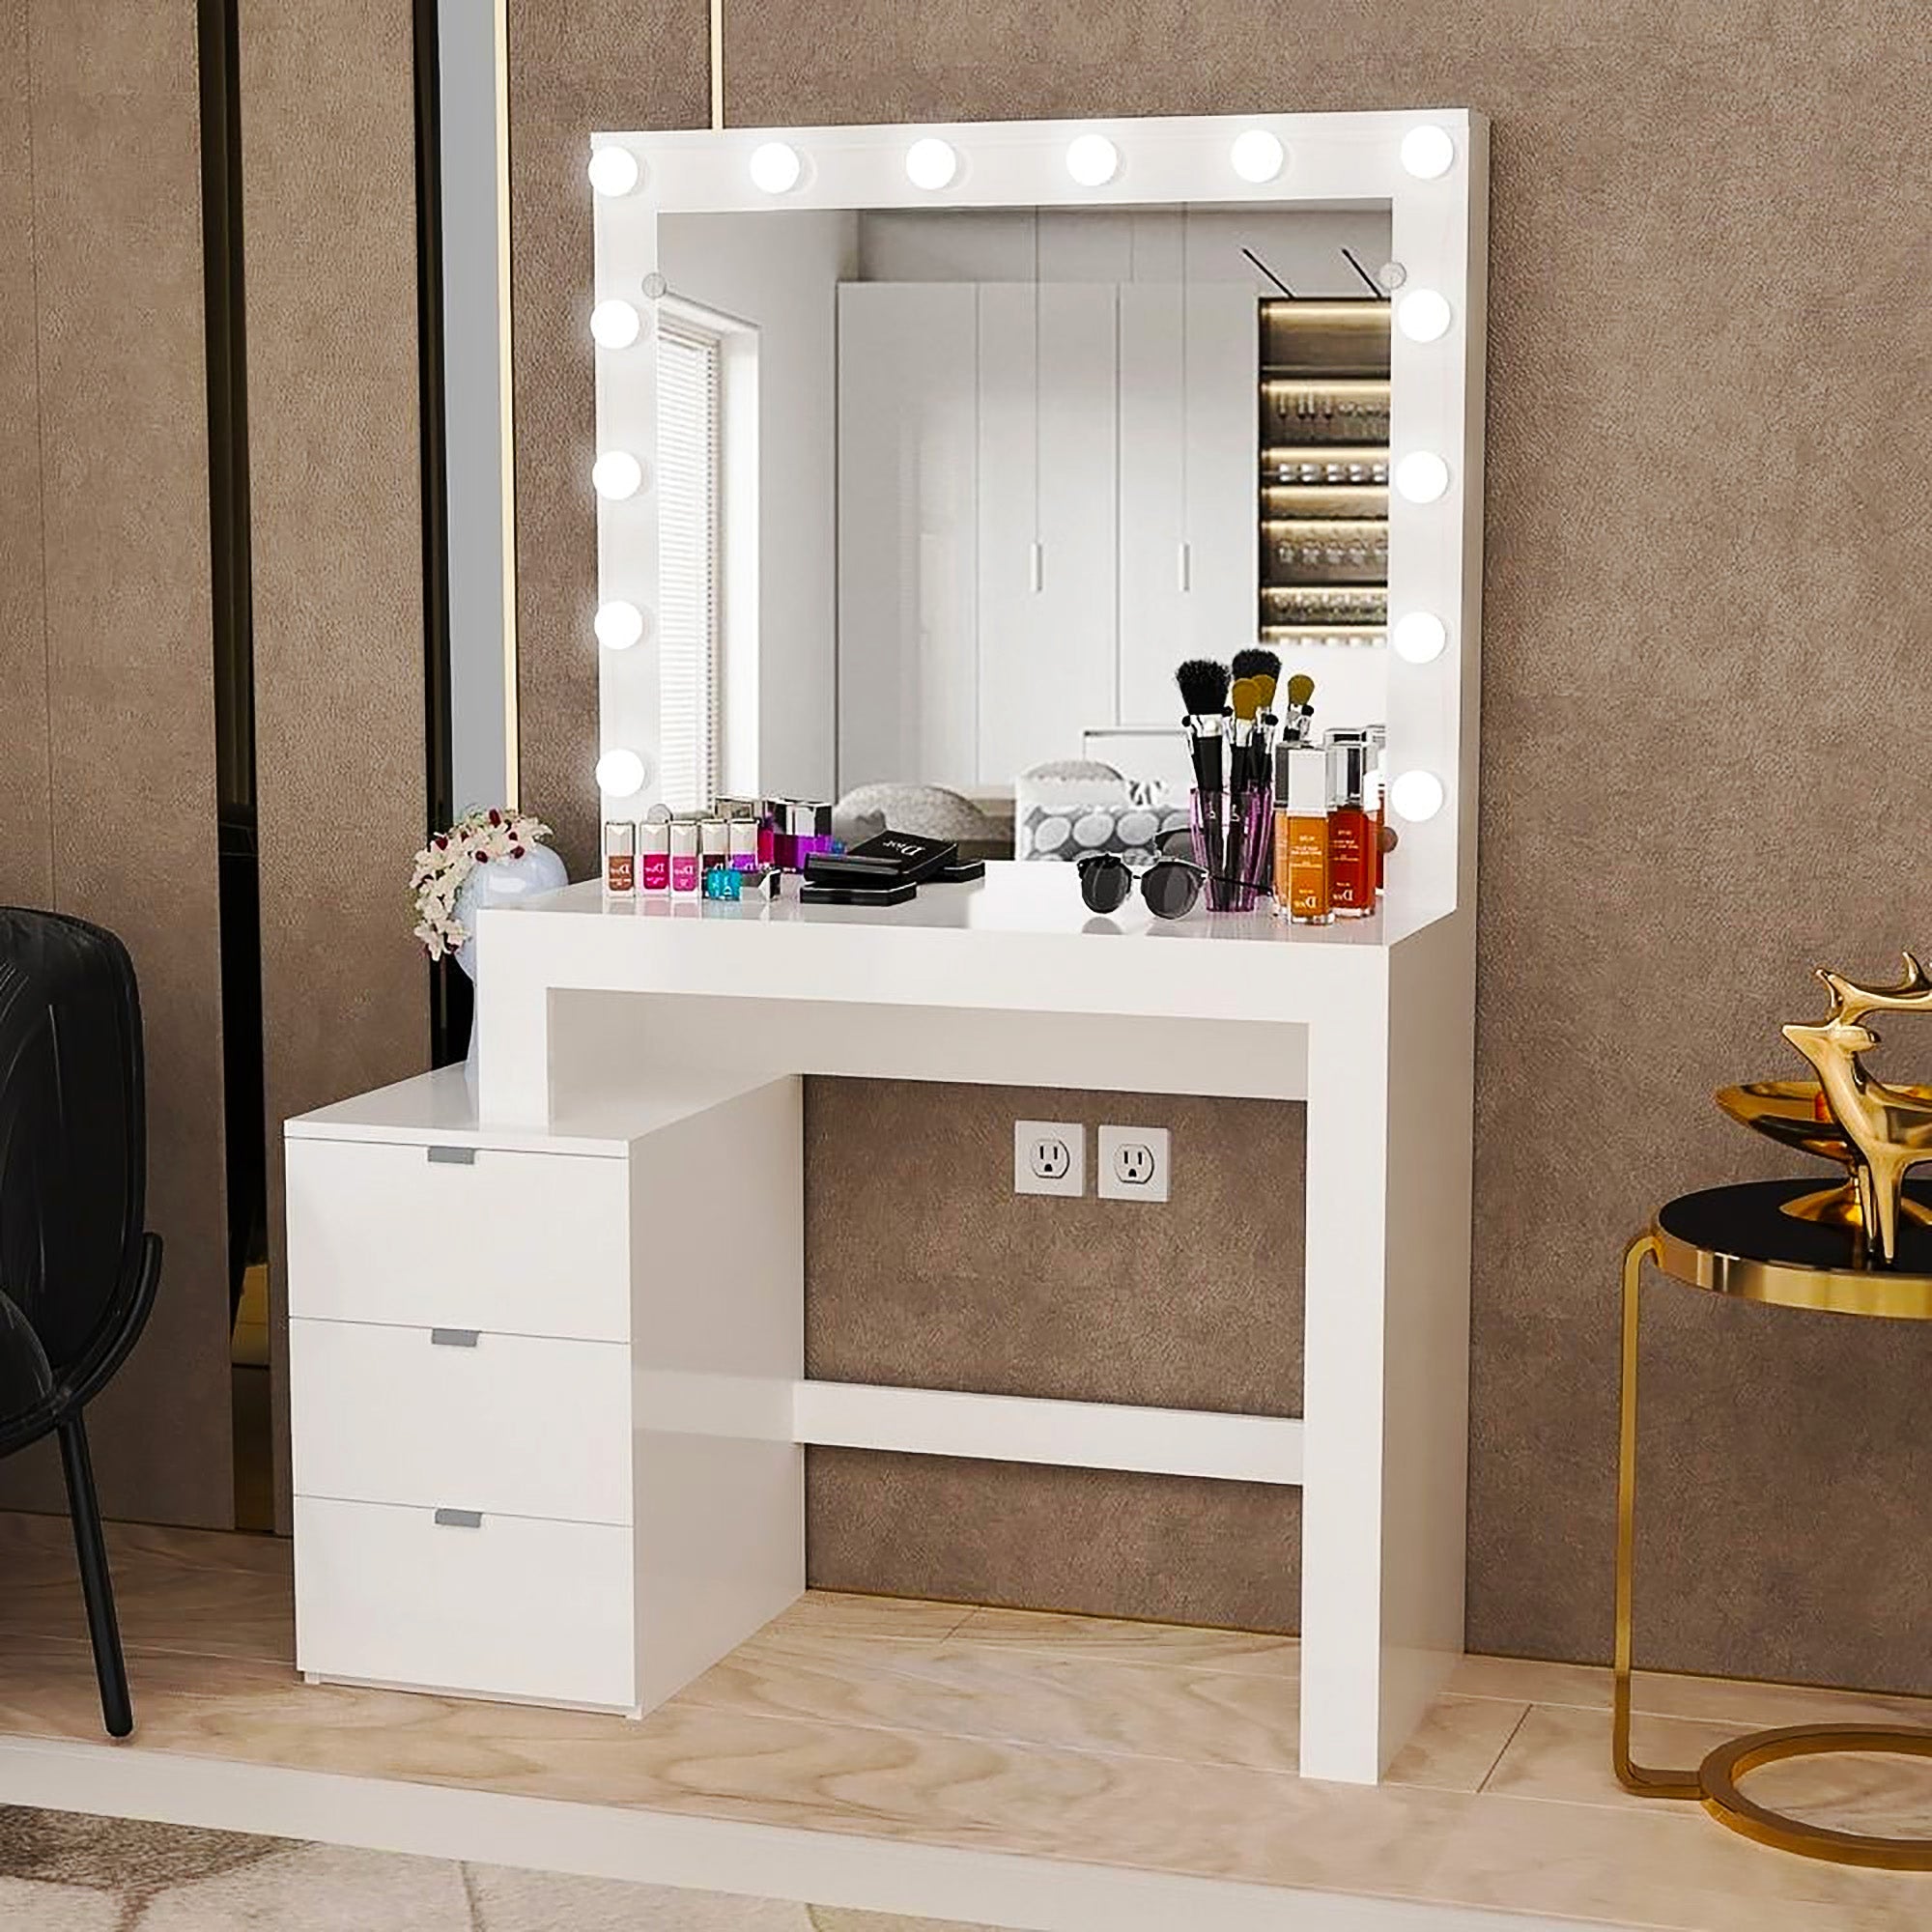 Dressing table with mirror: modern design vanity tables